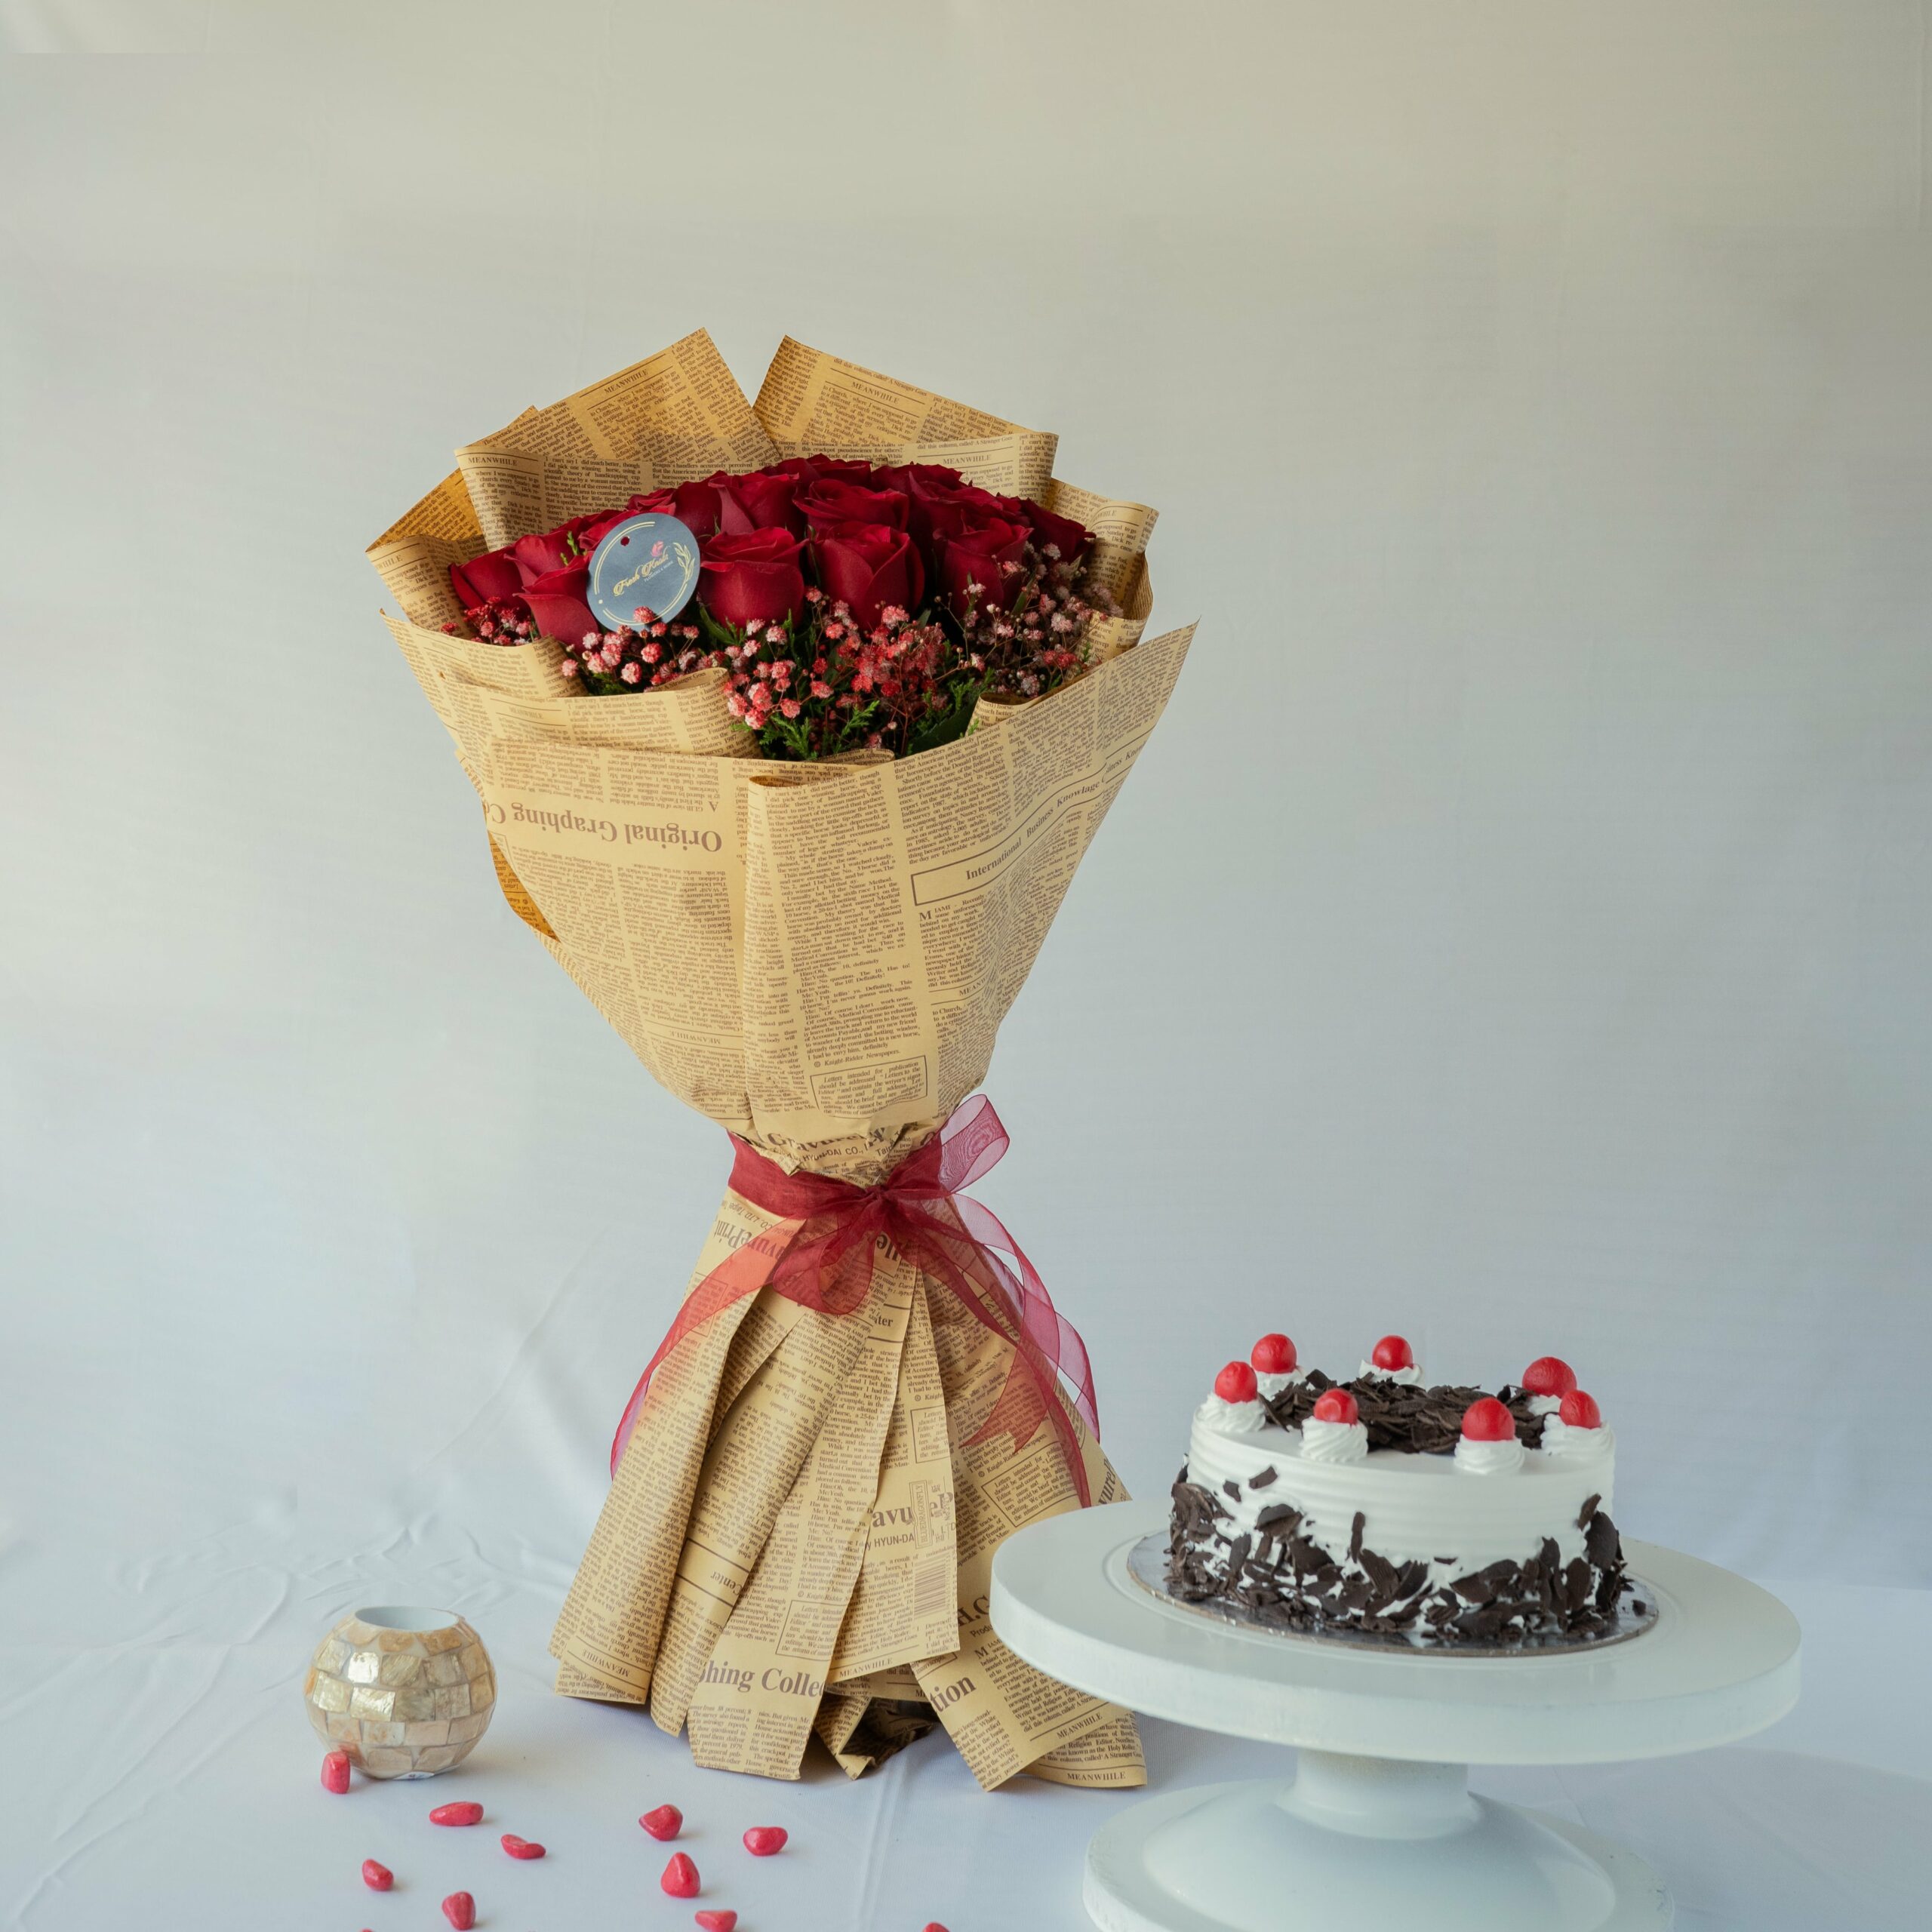 Shop for Fresh Lily and Orchid Bouquet with Birthday Cake online -  Kapurthala